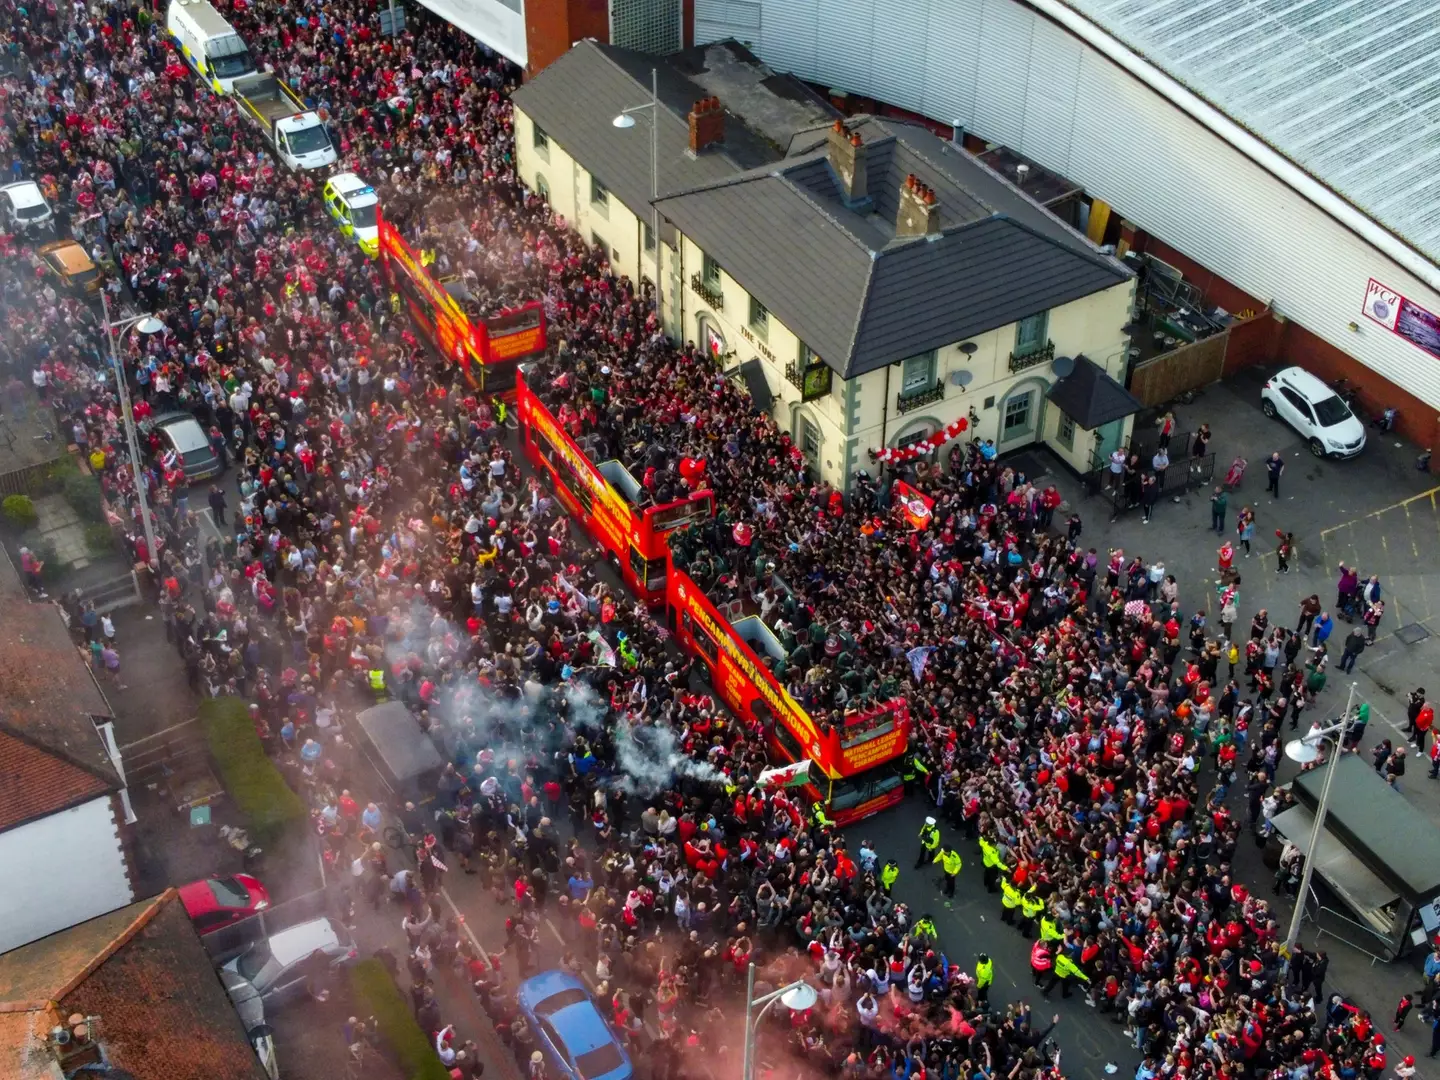 Thousands lined the streets for the celebrations.